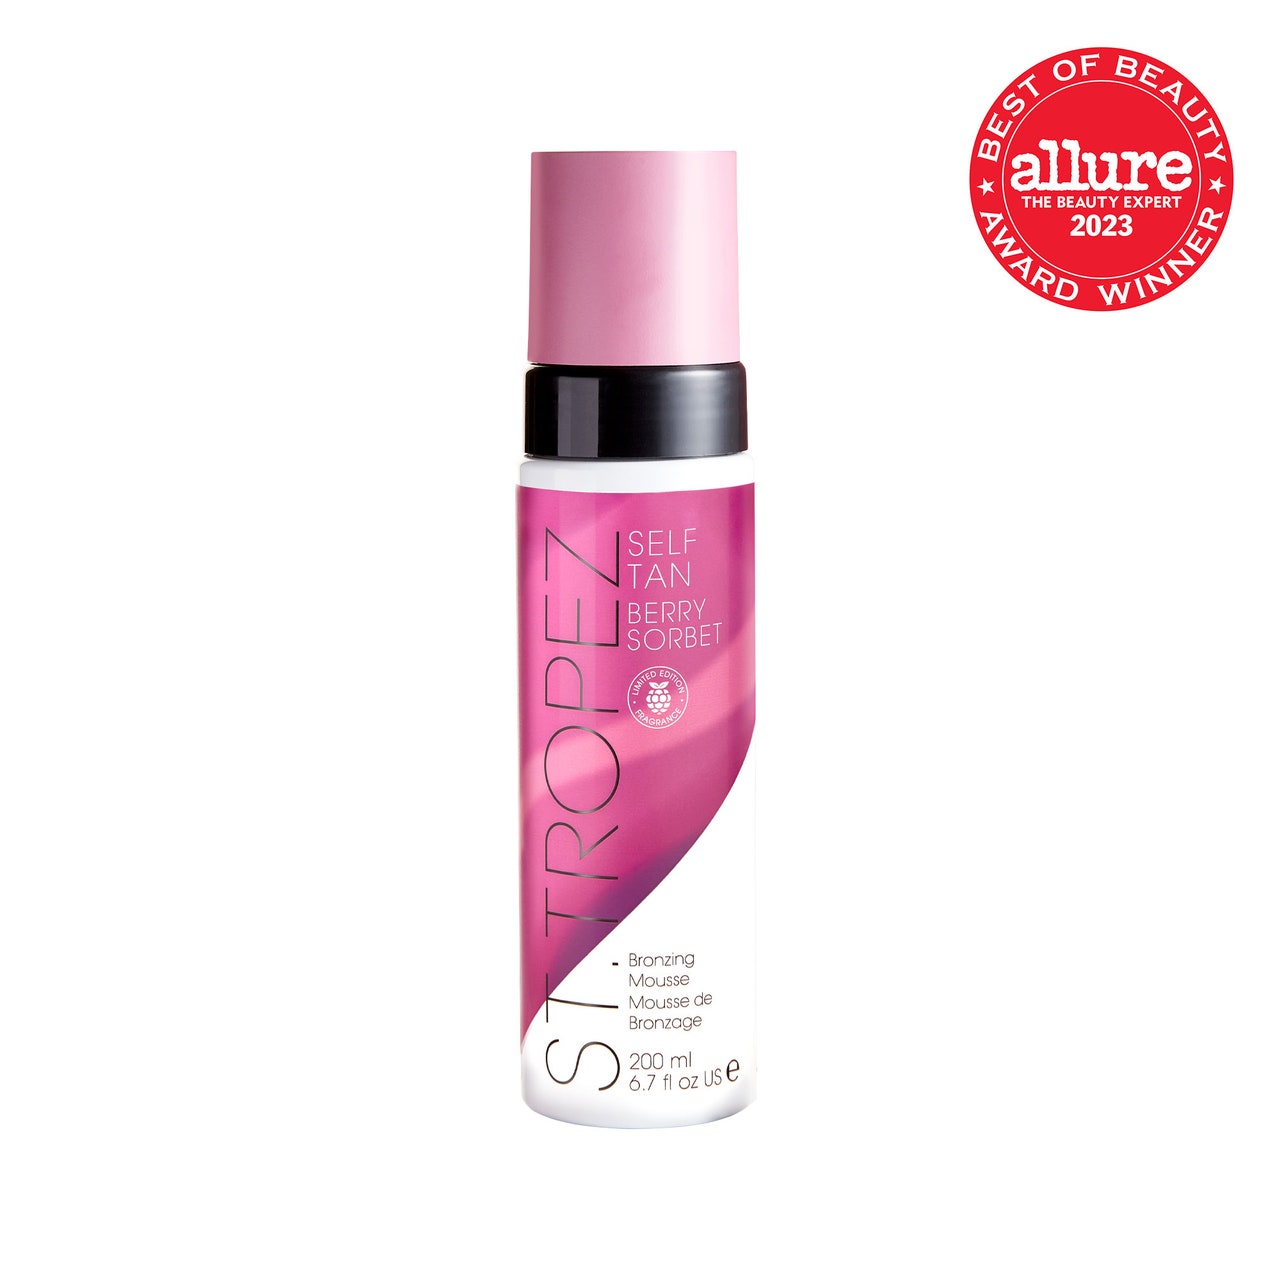 St. Tropez Self Tan Berry Sorbet Bronzing Mousse pink and white bottle on white background with red Allure BoB seal in the top right corner